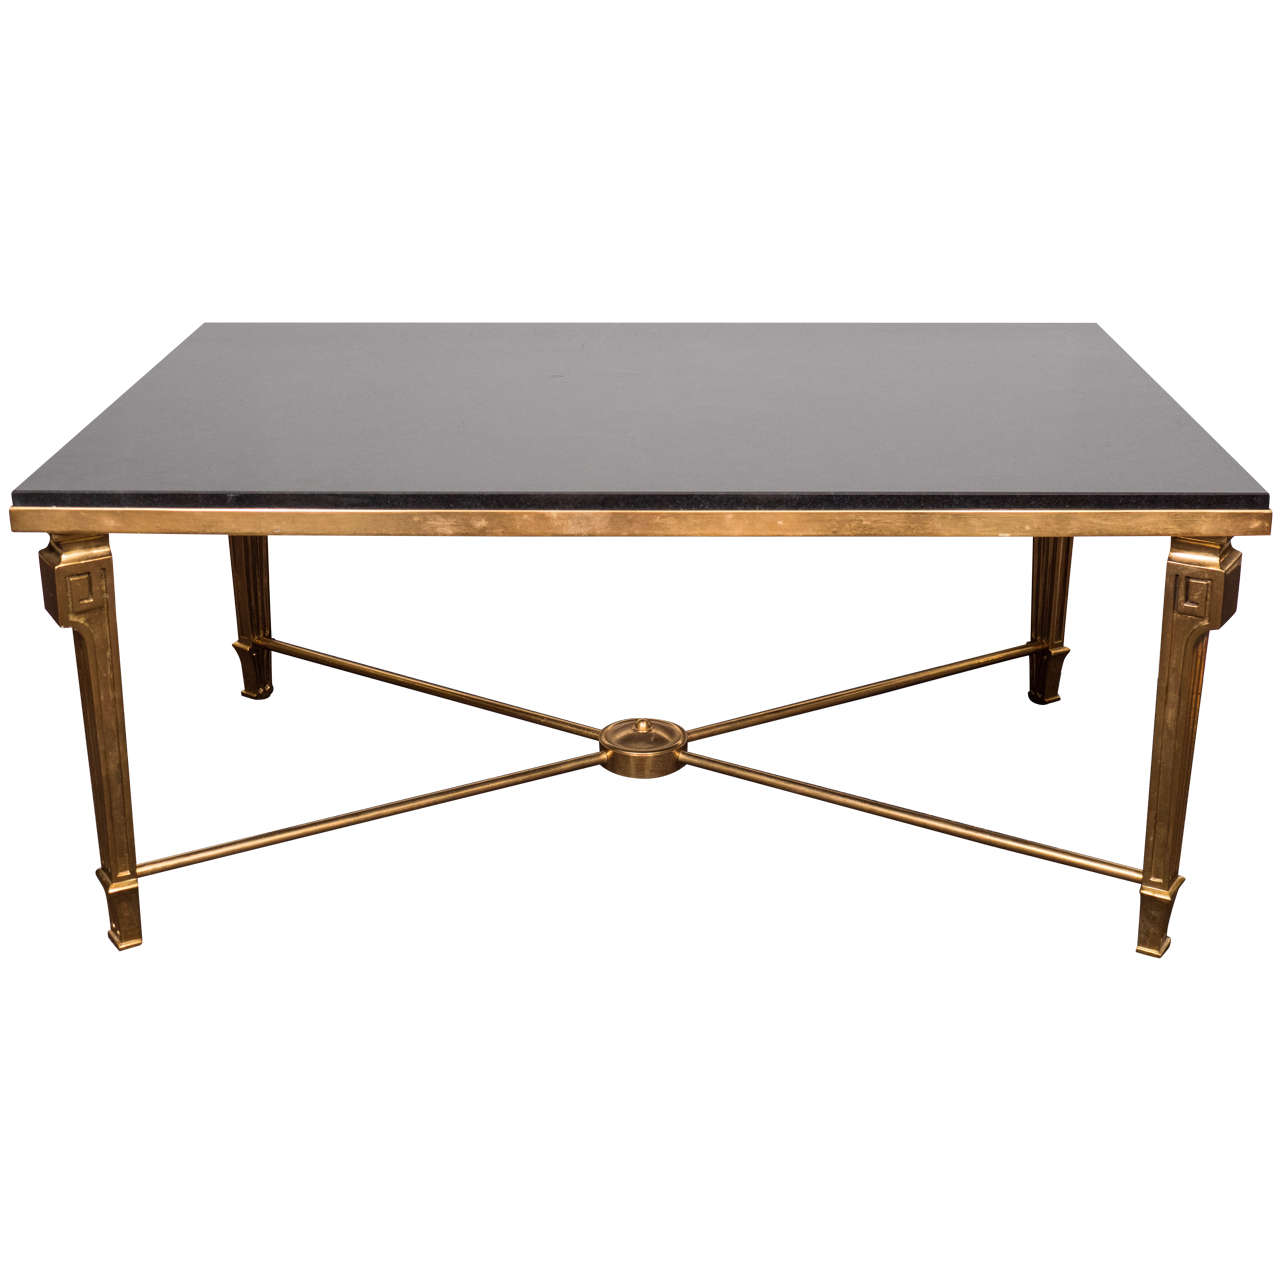  Spectacular Art Moderne Style Bronze Coffee or Cocktail Table by Maison Jansen For Sale